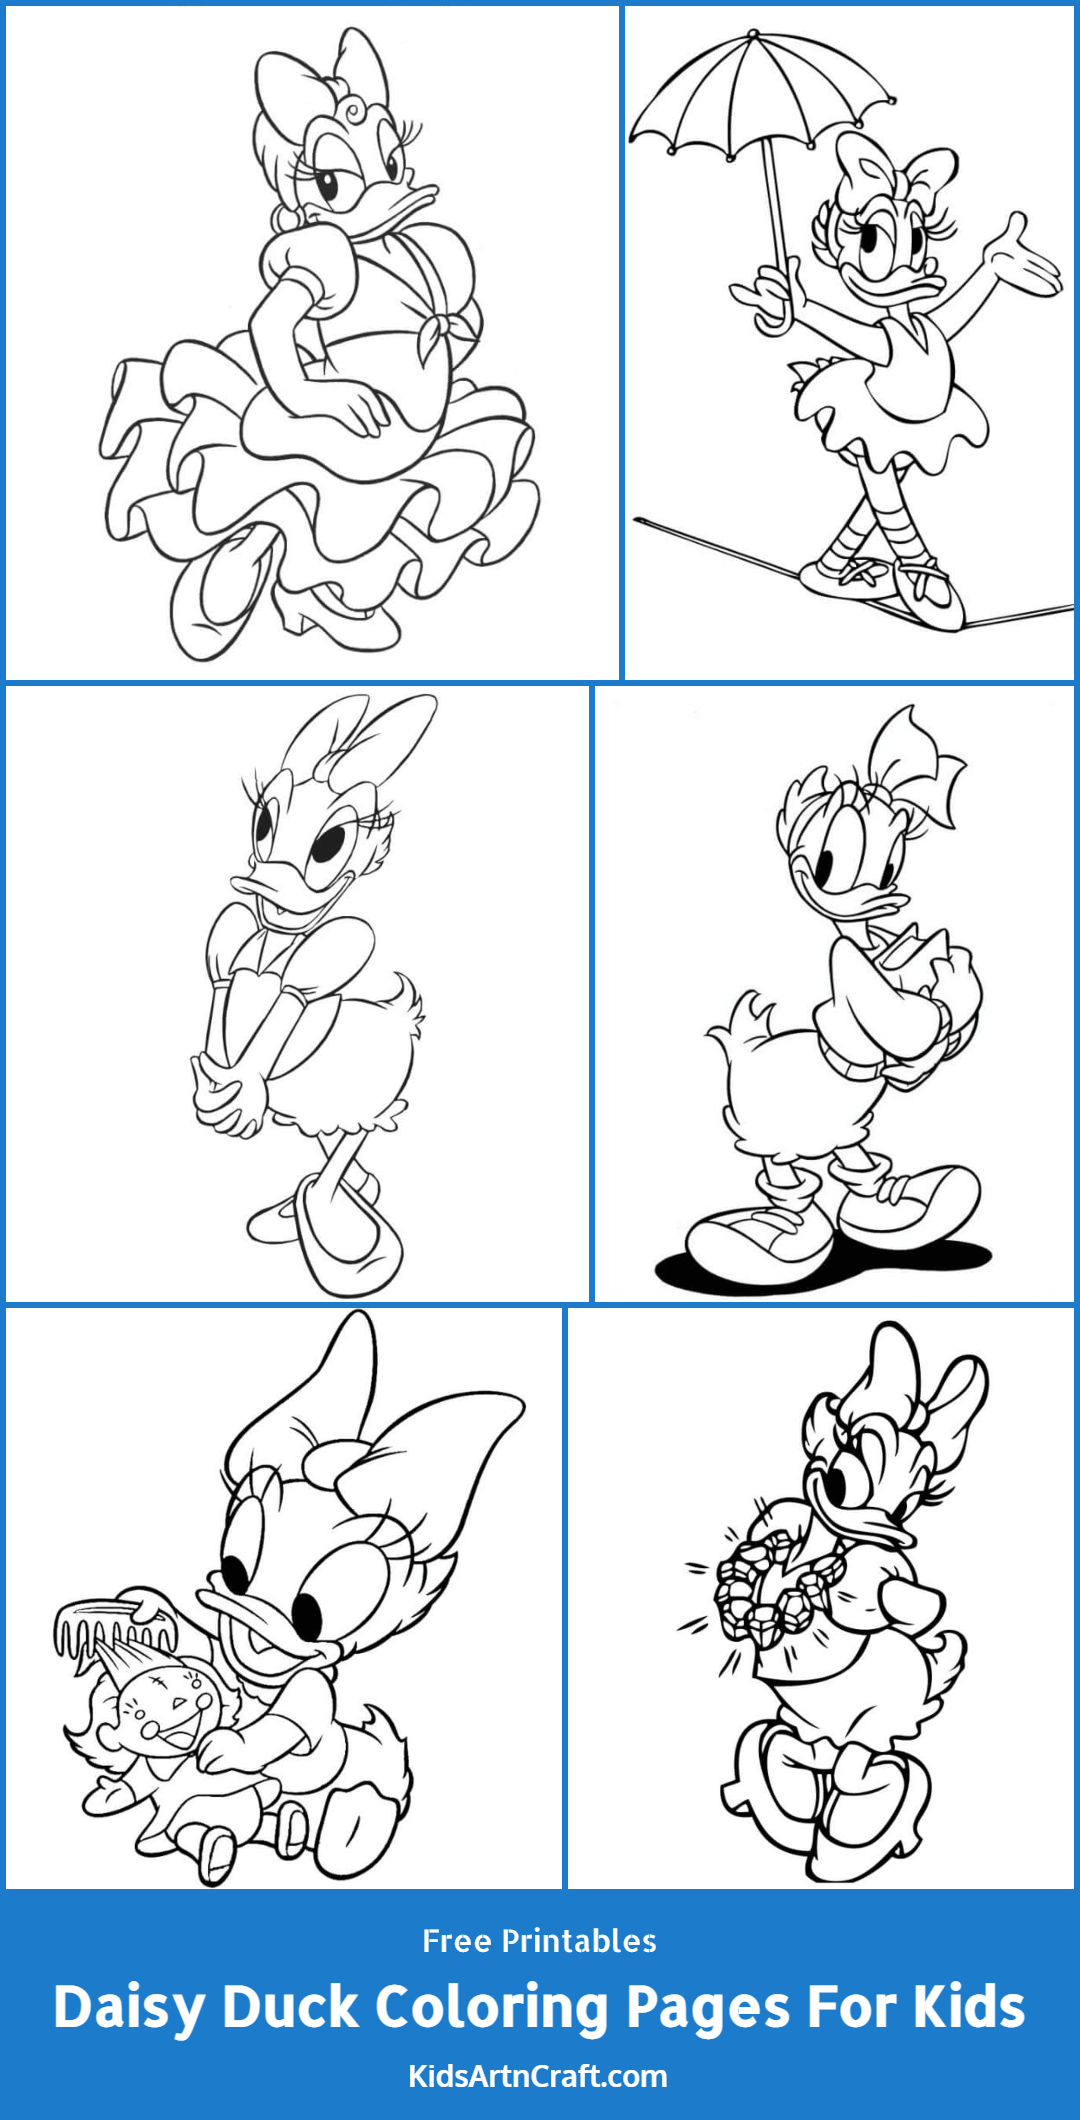 Daisy Duck Coloring Pages For Kids – Free Printables